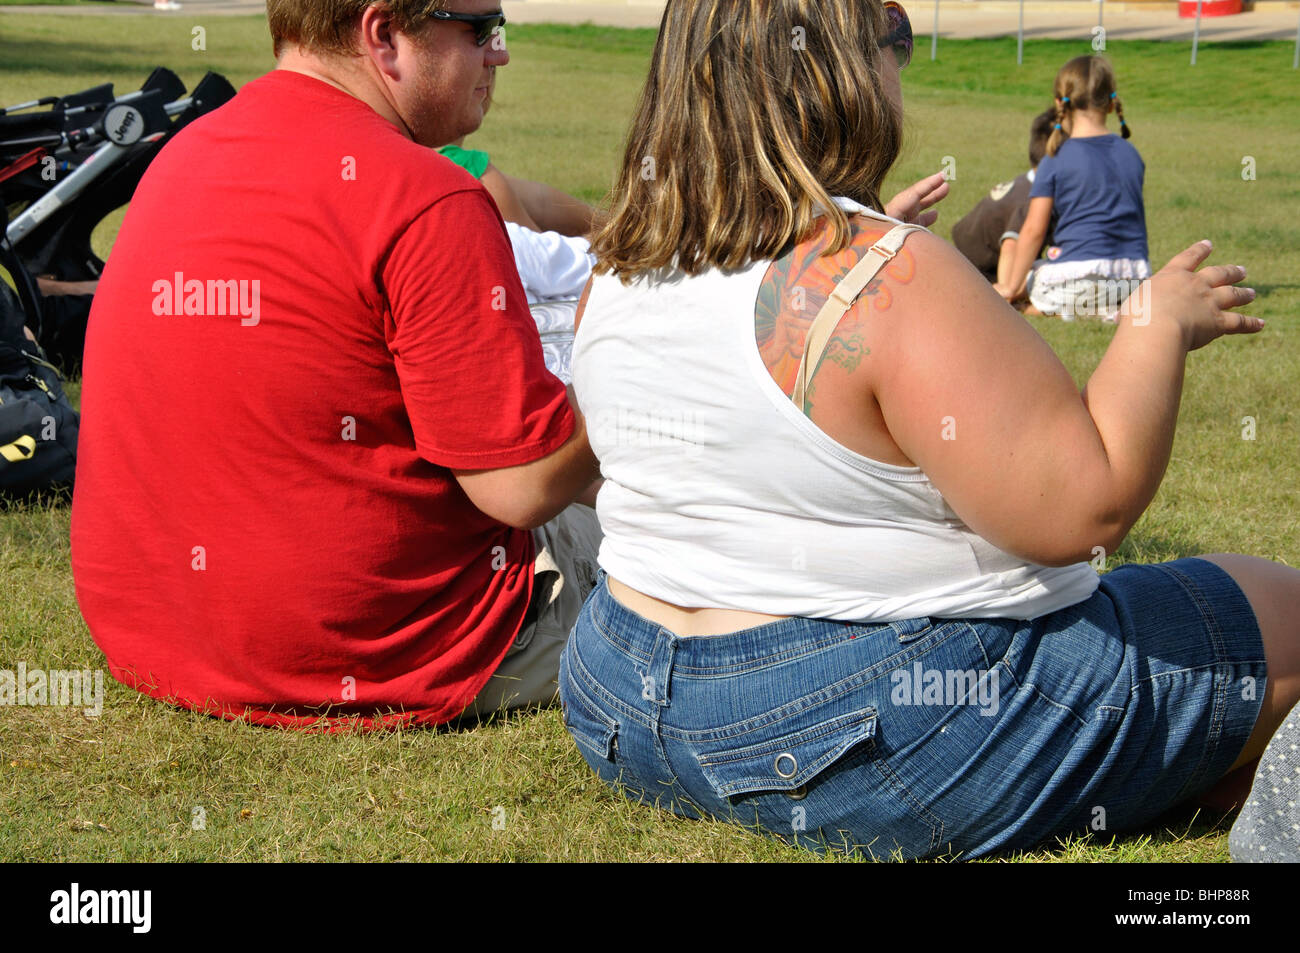 Very fat woman and man Stock Photo